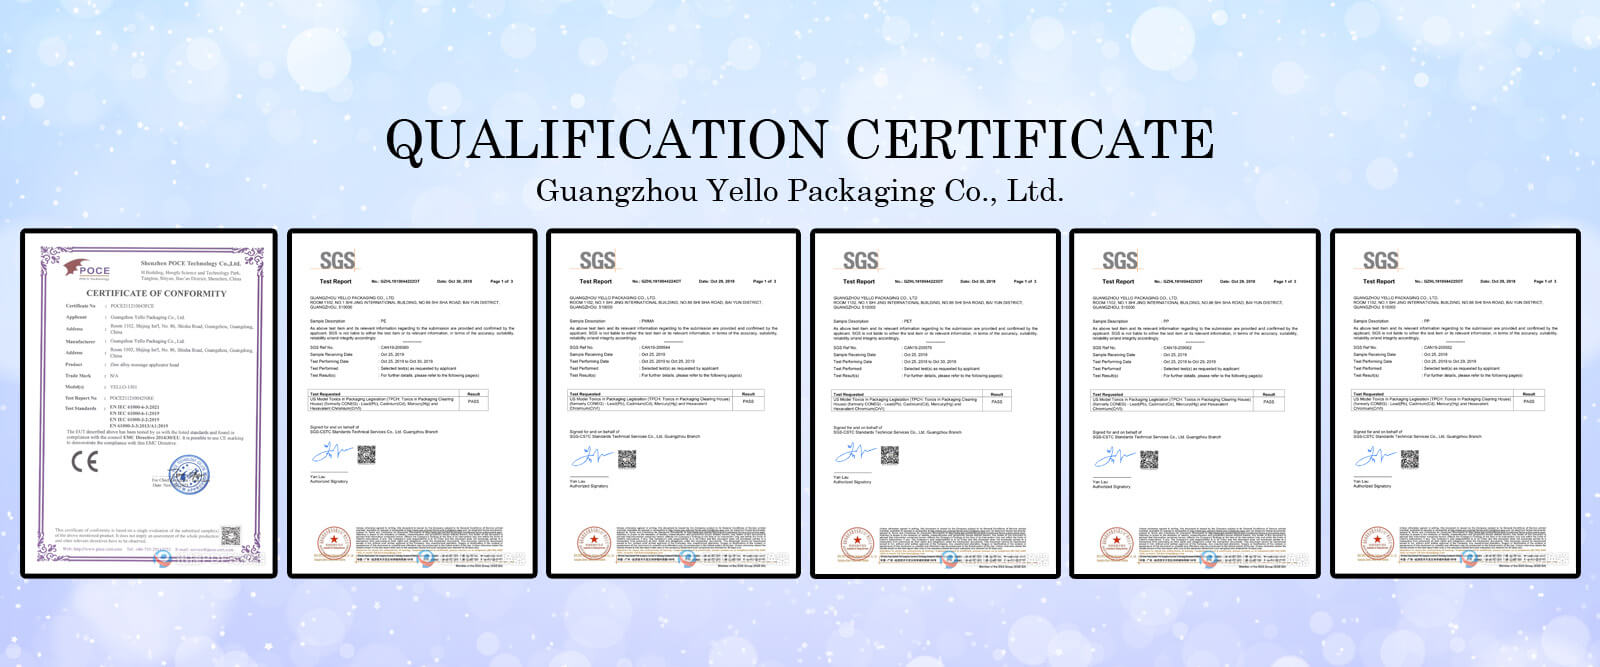 Qualification Certificate - Yello Packaging